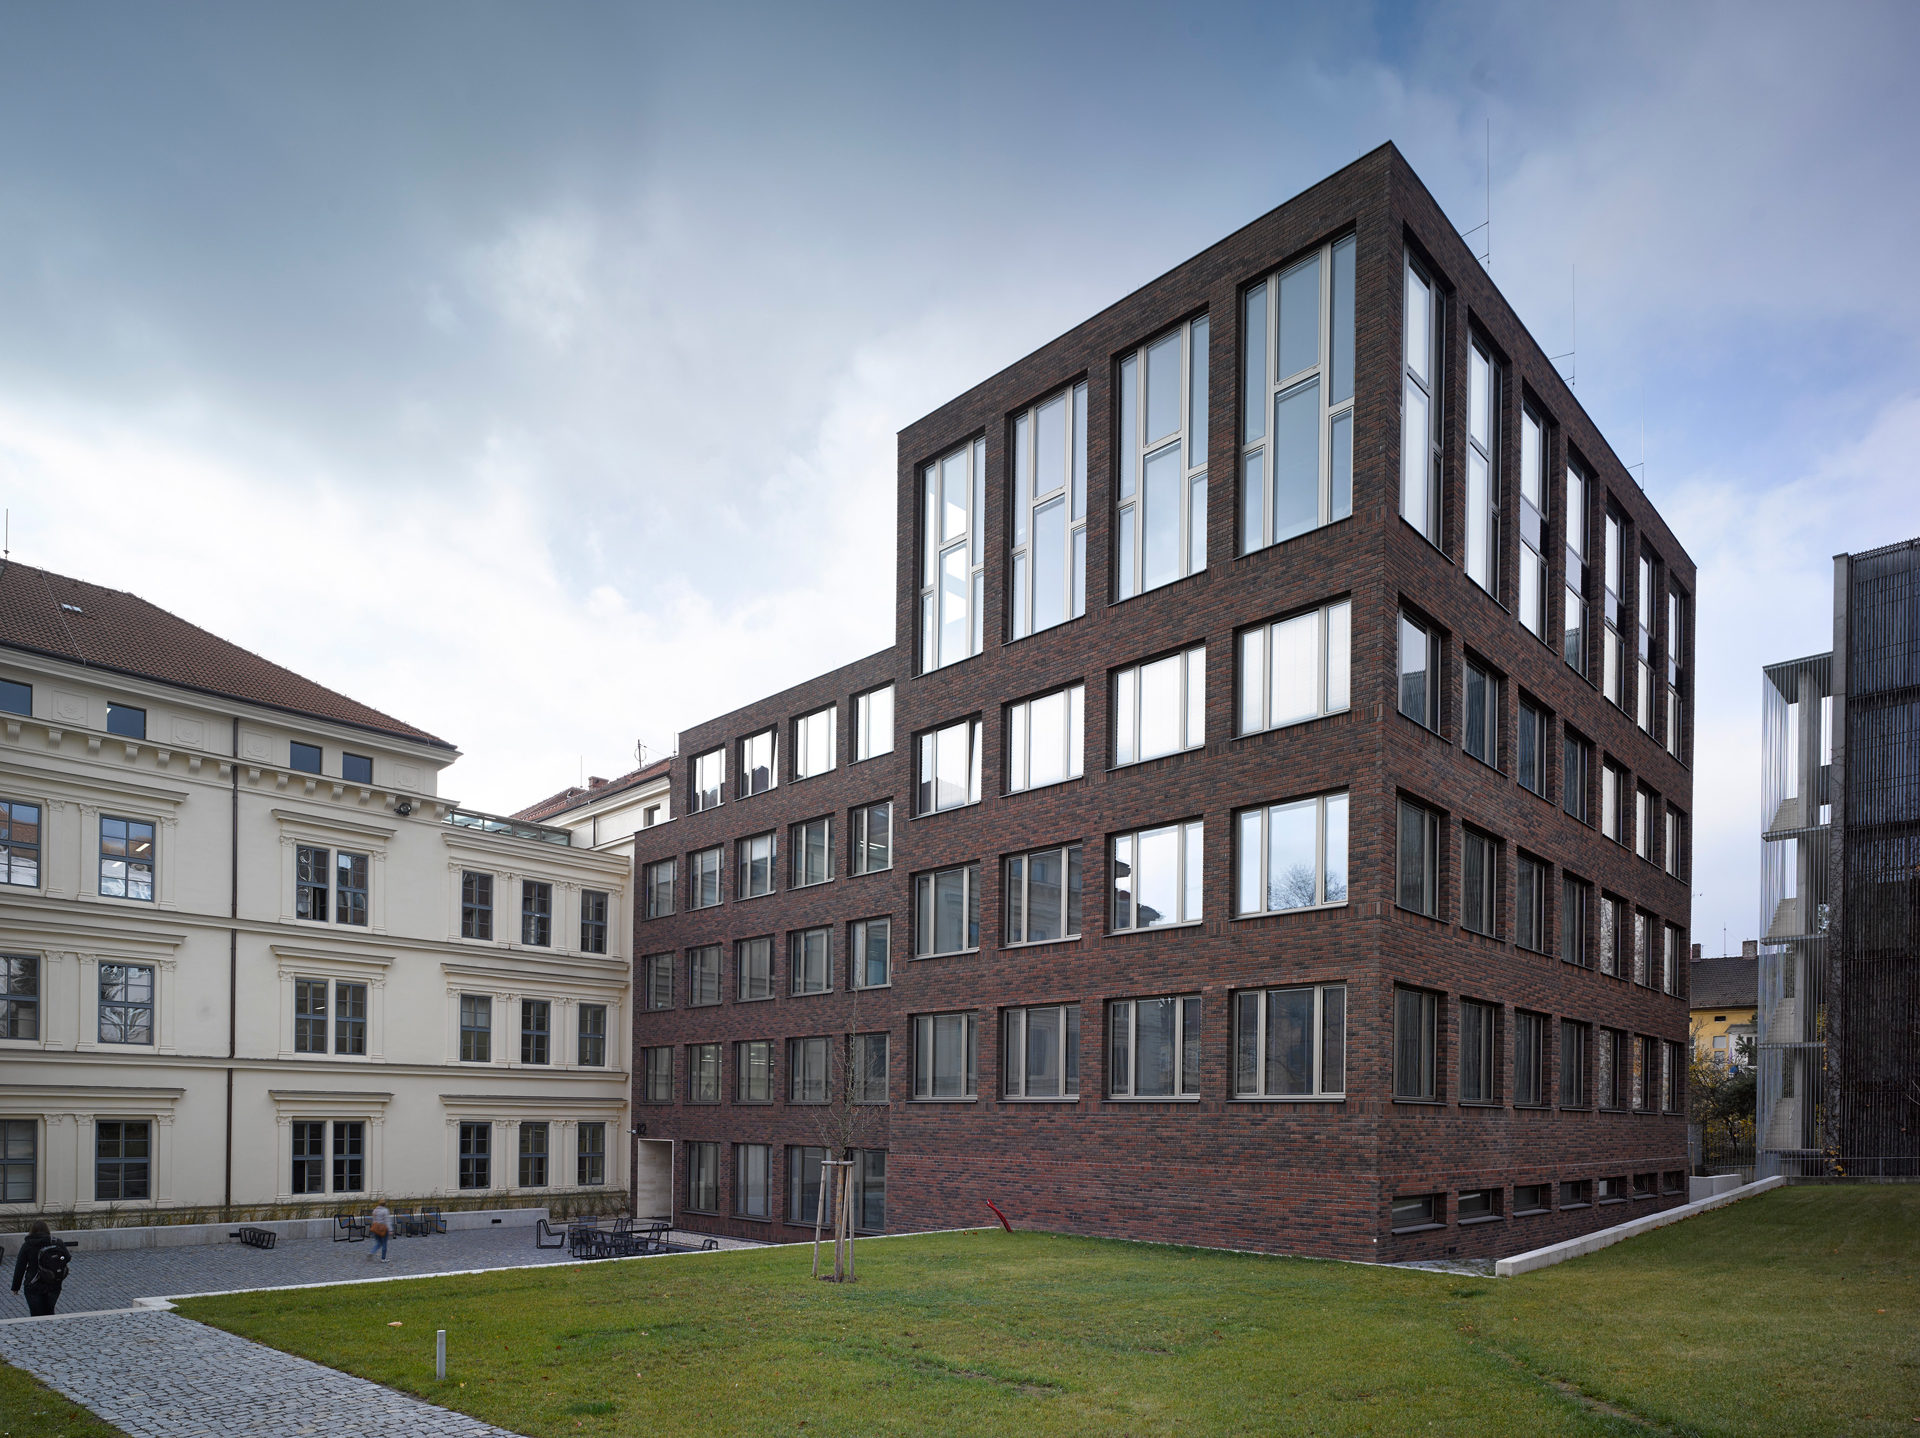 The Faculty of Arts of Masaryk University in Brno